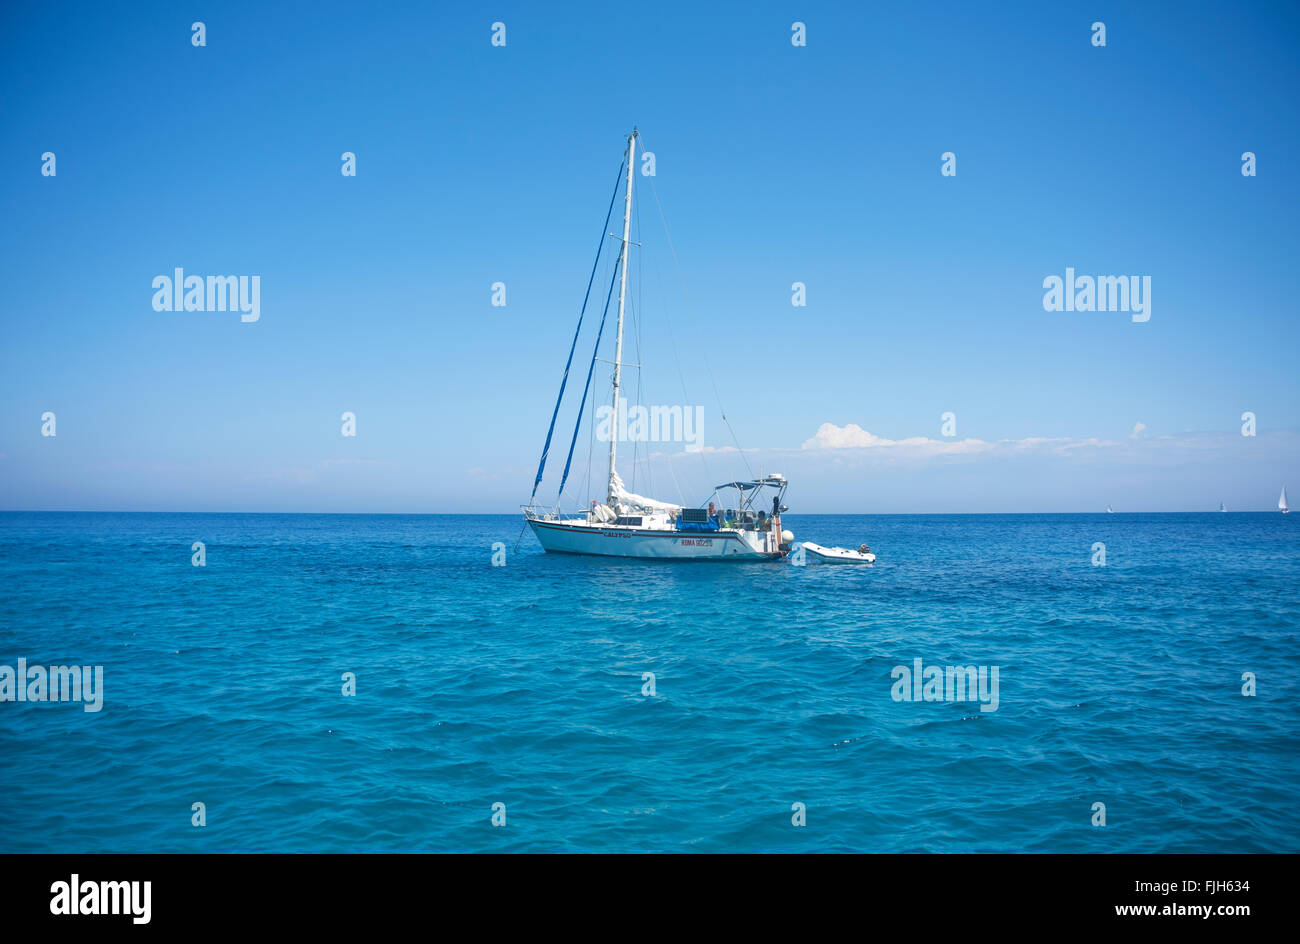 Sailing boat in the Ionian sea, off the coast of Zakynthos in Greece Stock Photo